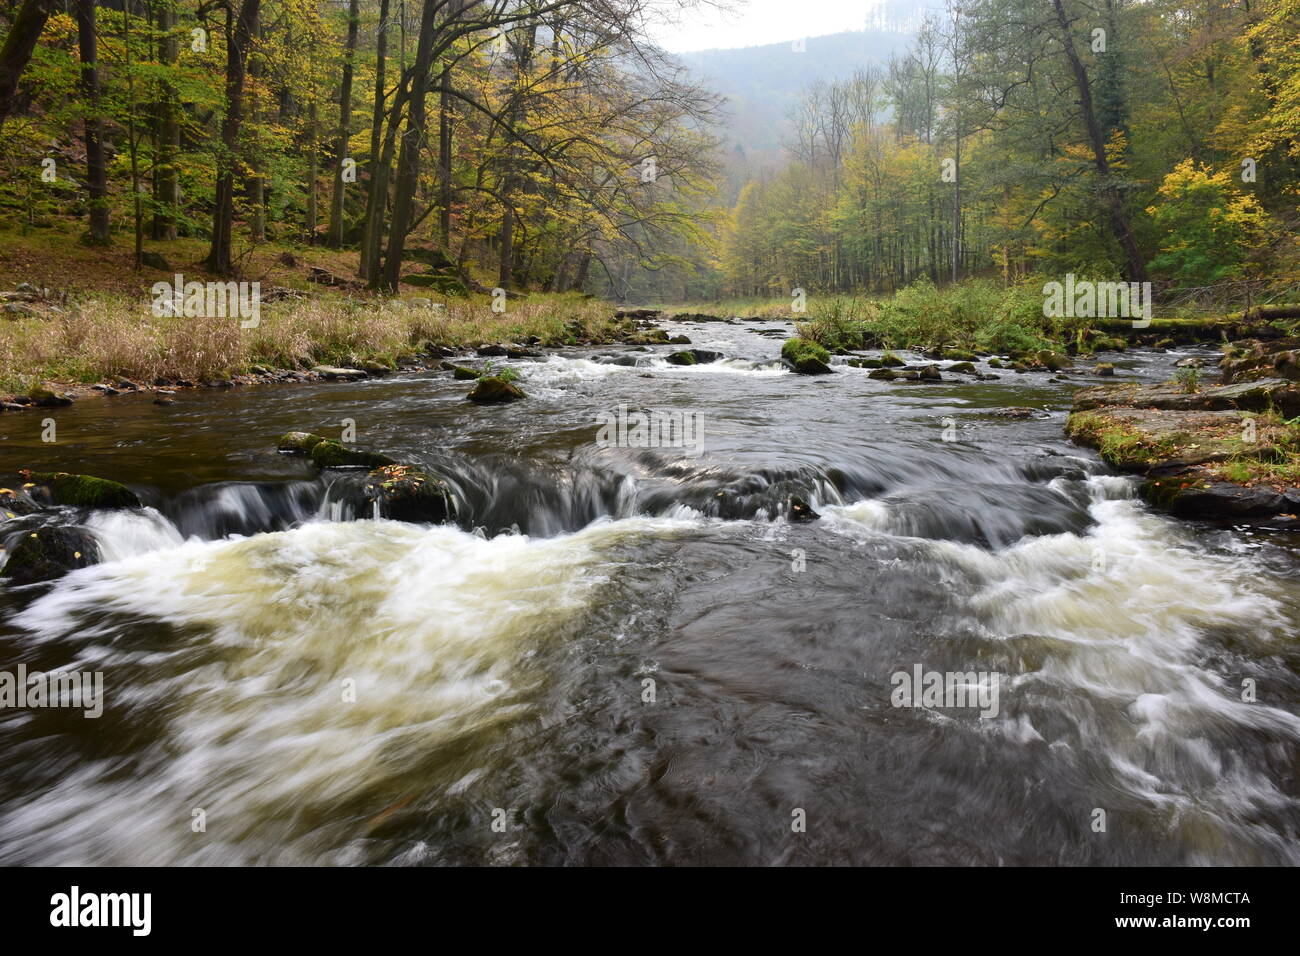 Kamp river, one of the last free-flowing major aquatic ecosystems in Austria, in the midst of natural primeval-like forest in autumn. Stock Photo